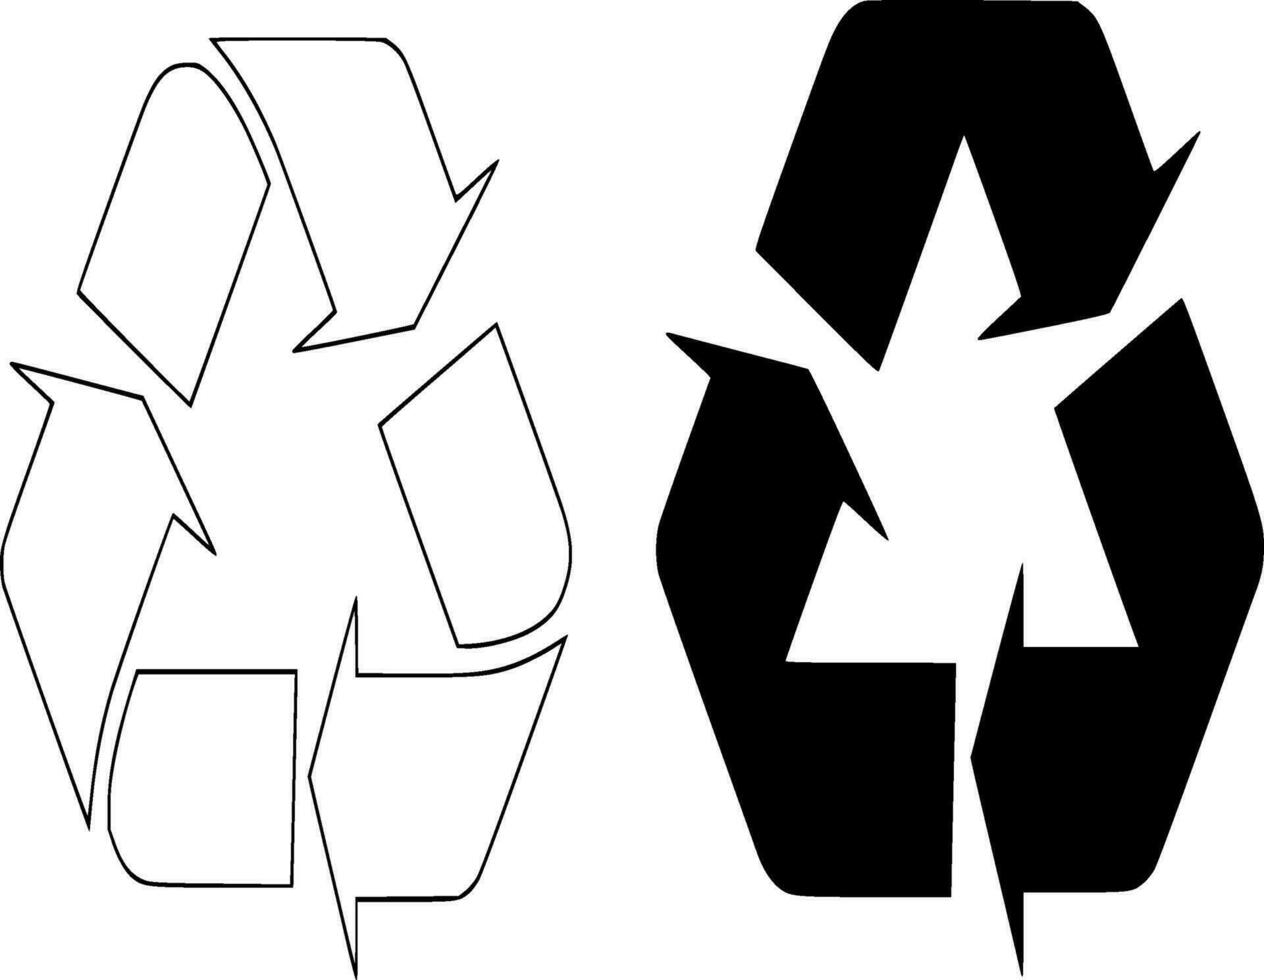 Recycling Silhouette Vector on white background